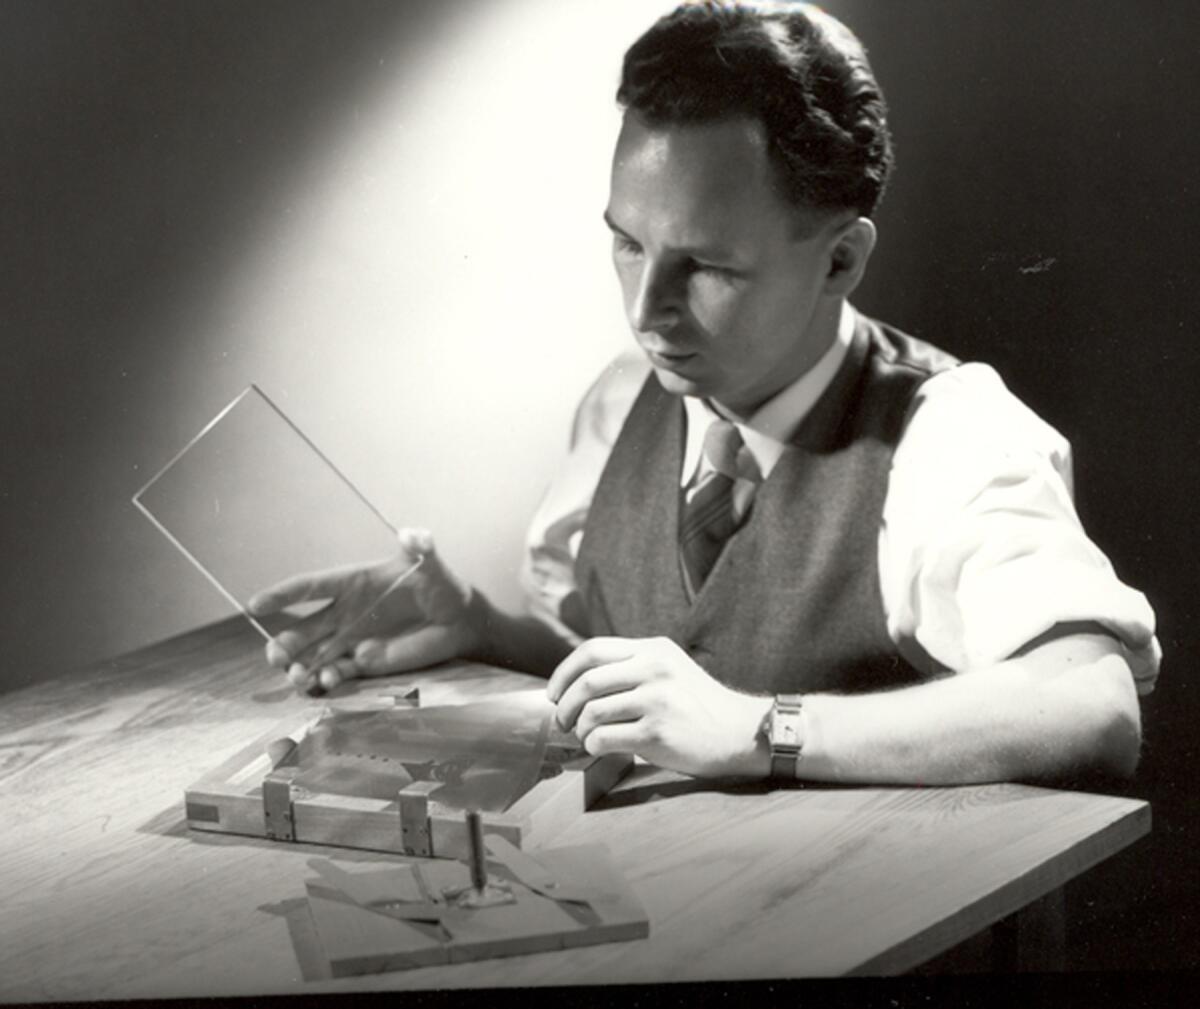 Glass scientist S. Donald Stookey prepares to expose an image to ultraviolet light in 1950. In addition to developing CorningWare, he developed photosensitive glass that helped lead to color television picture tubes. His numerous inventions generated big business for Corning.